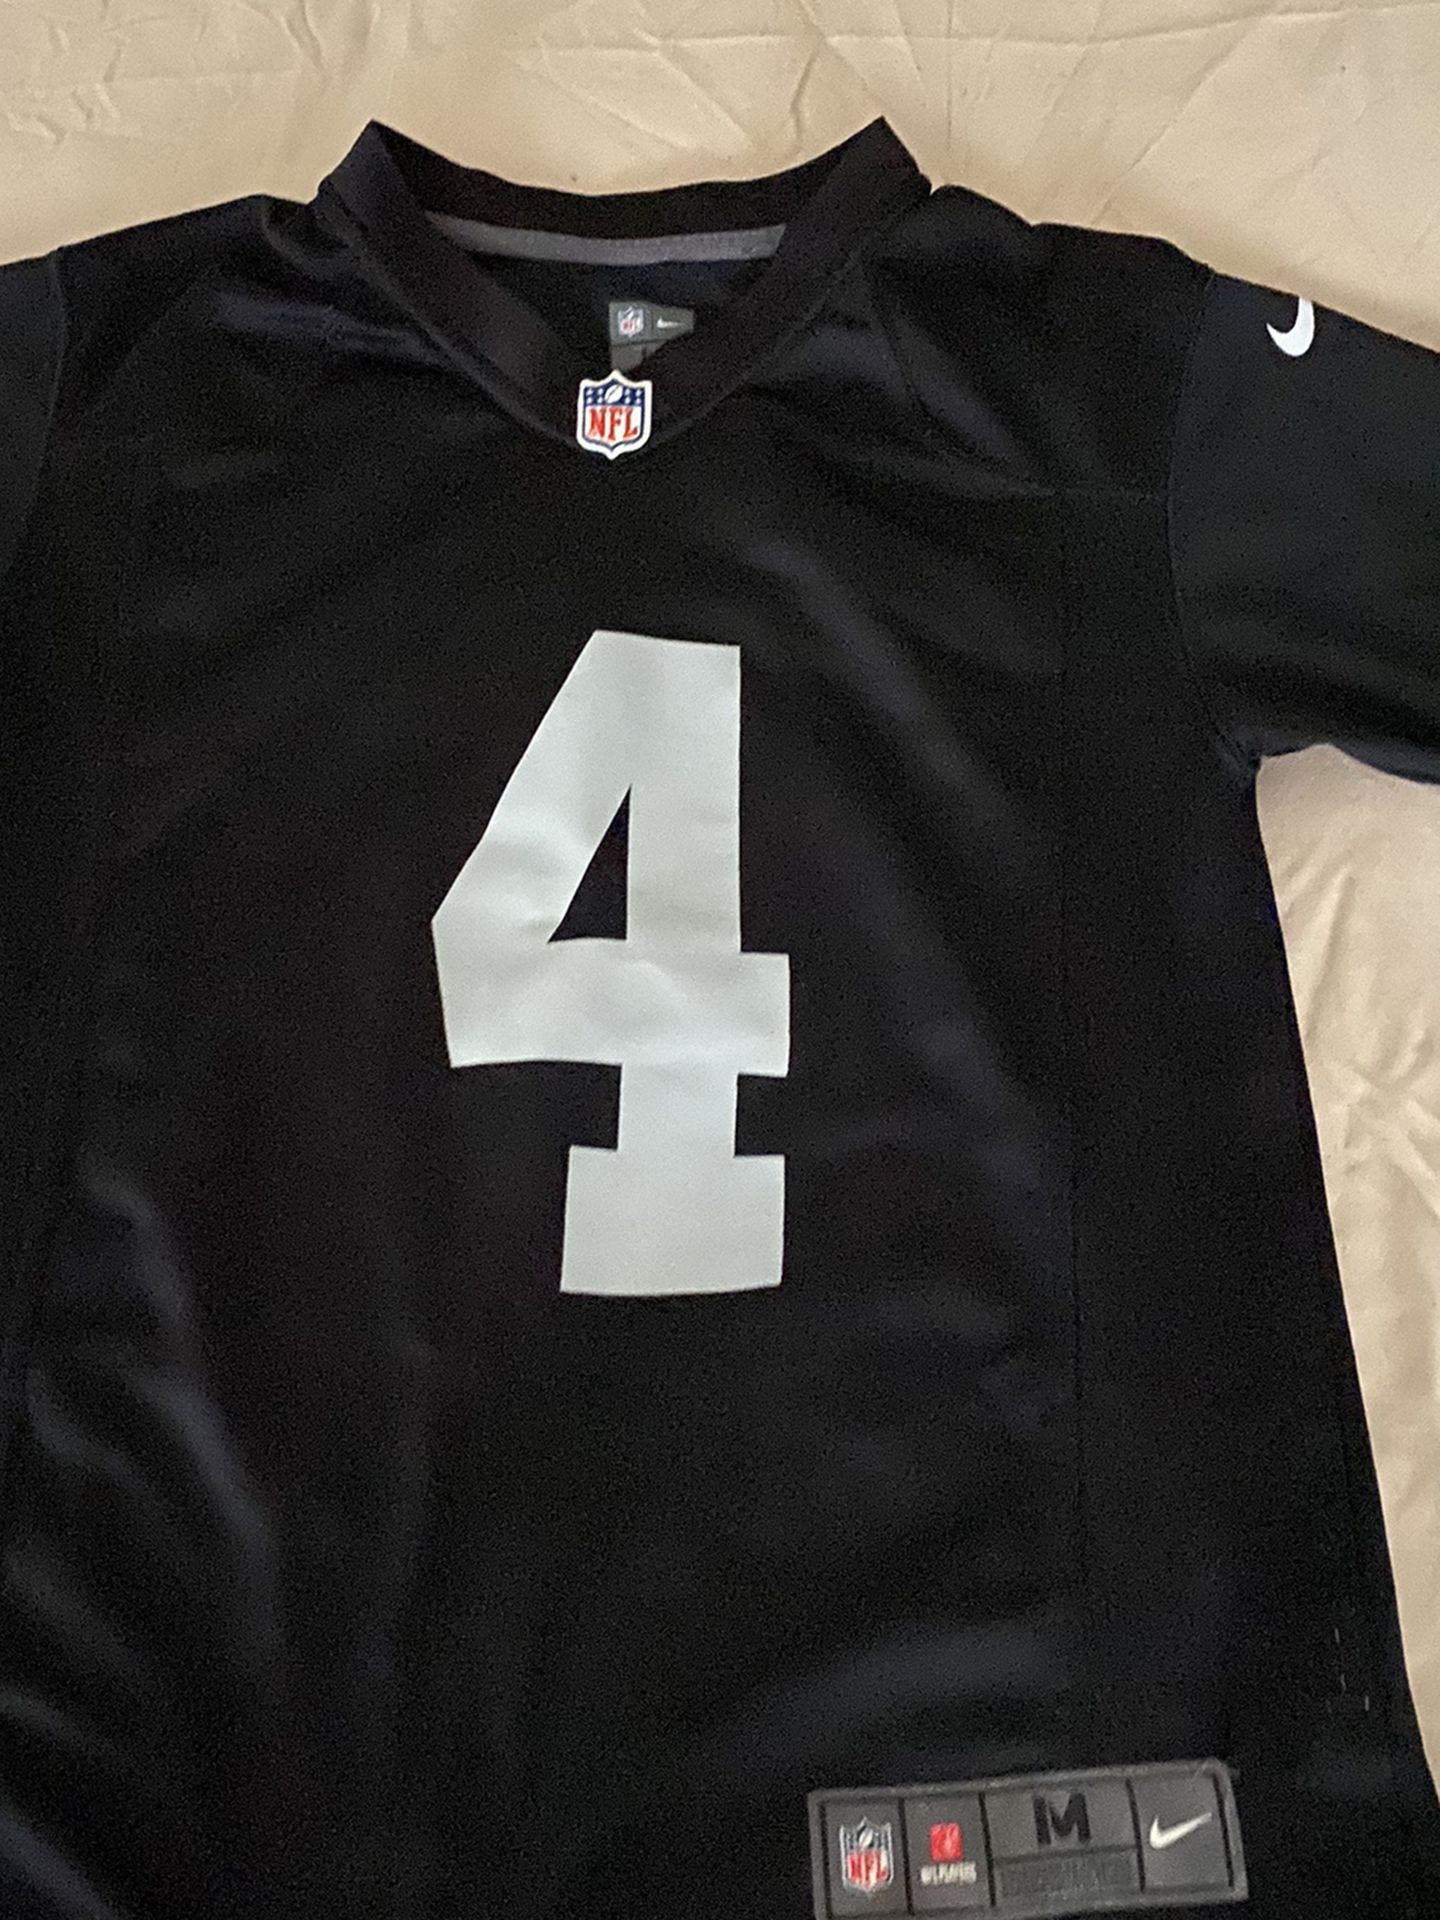 Youth raiders Jersey Size Med